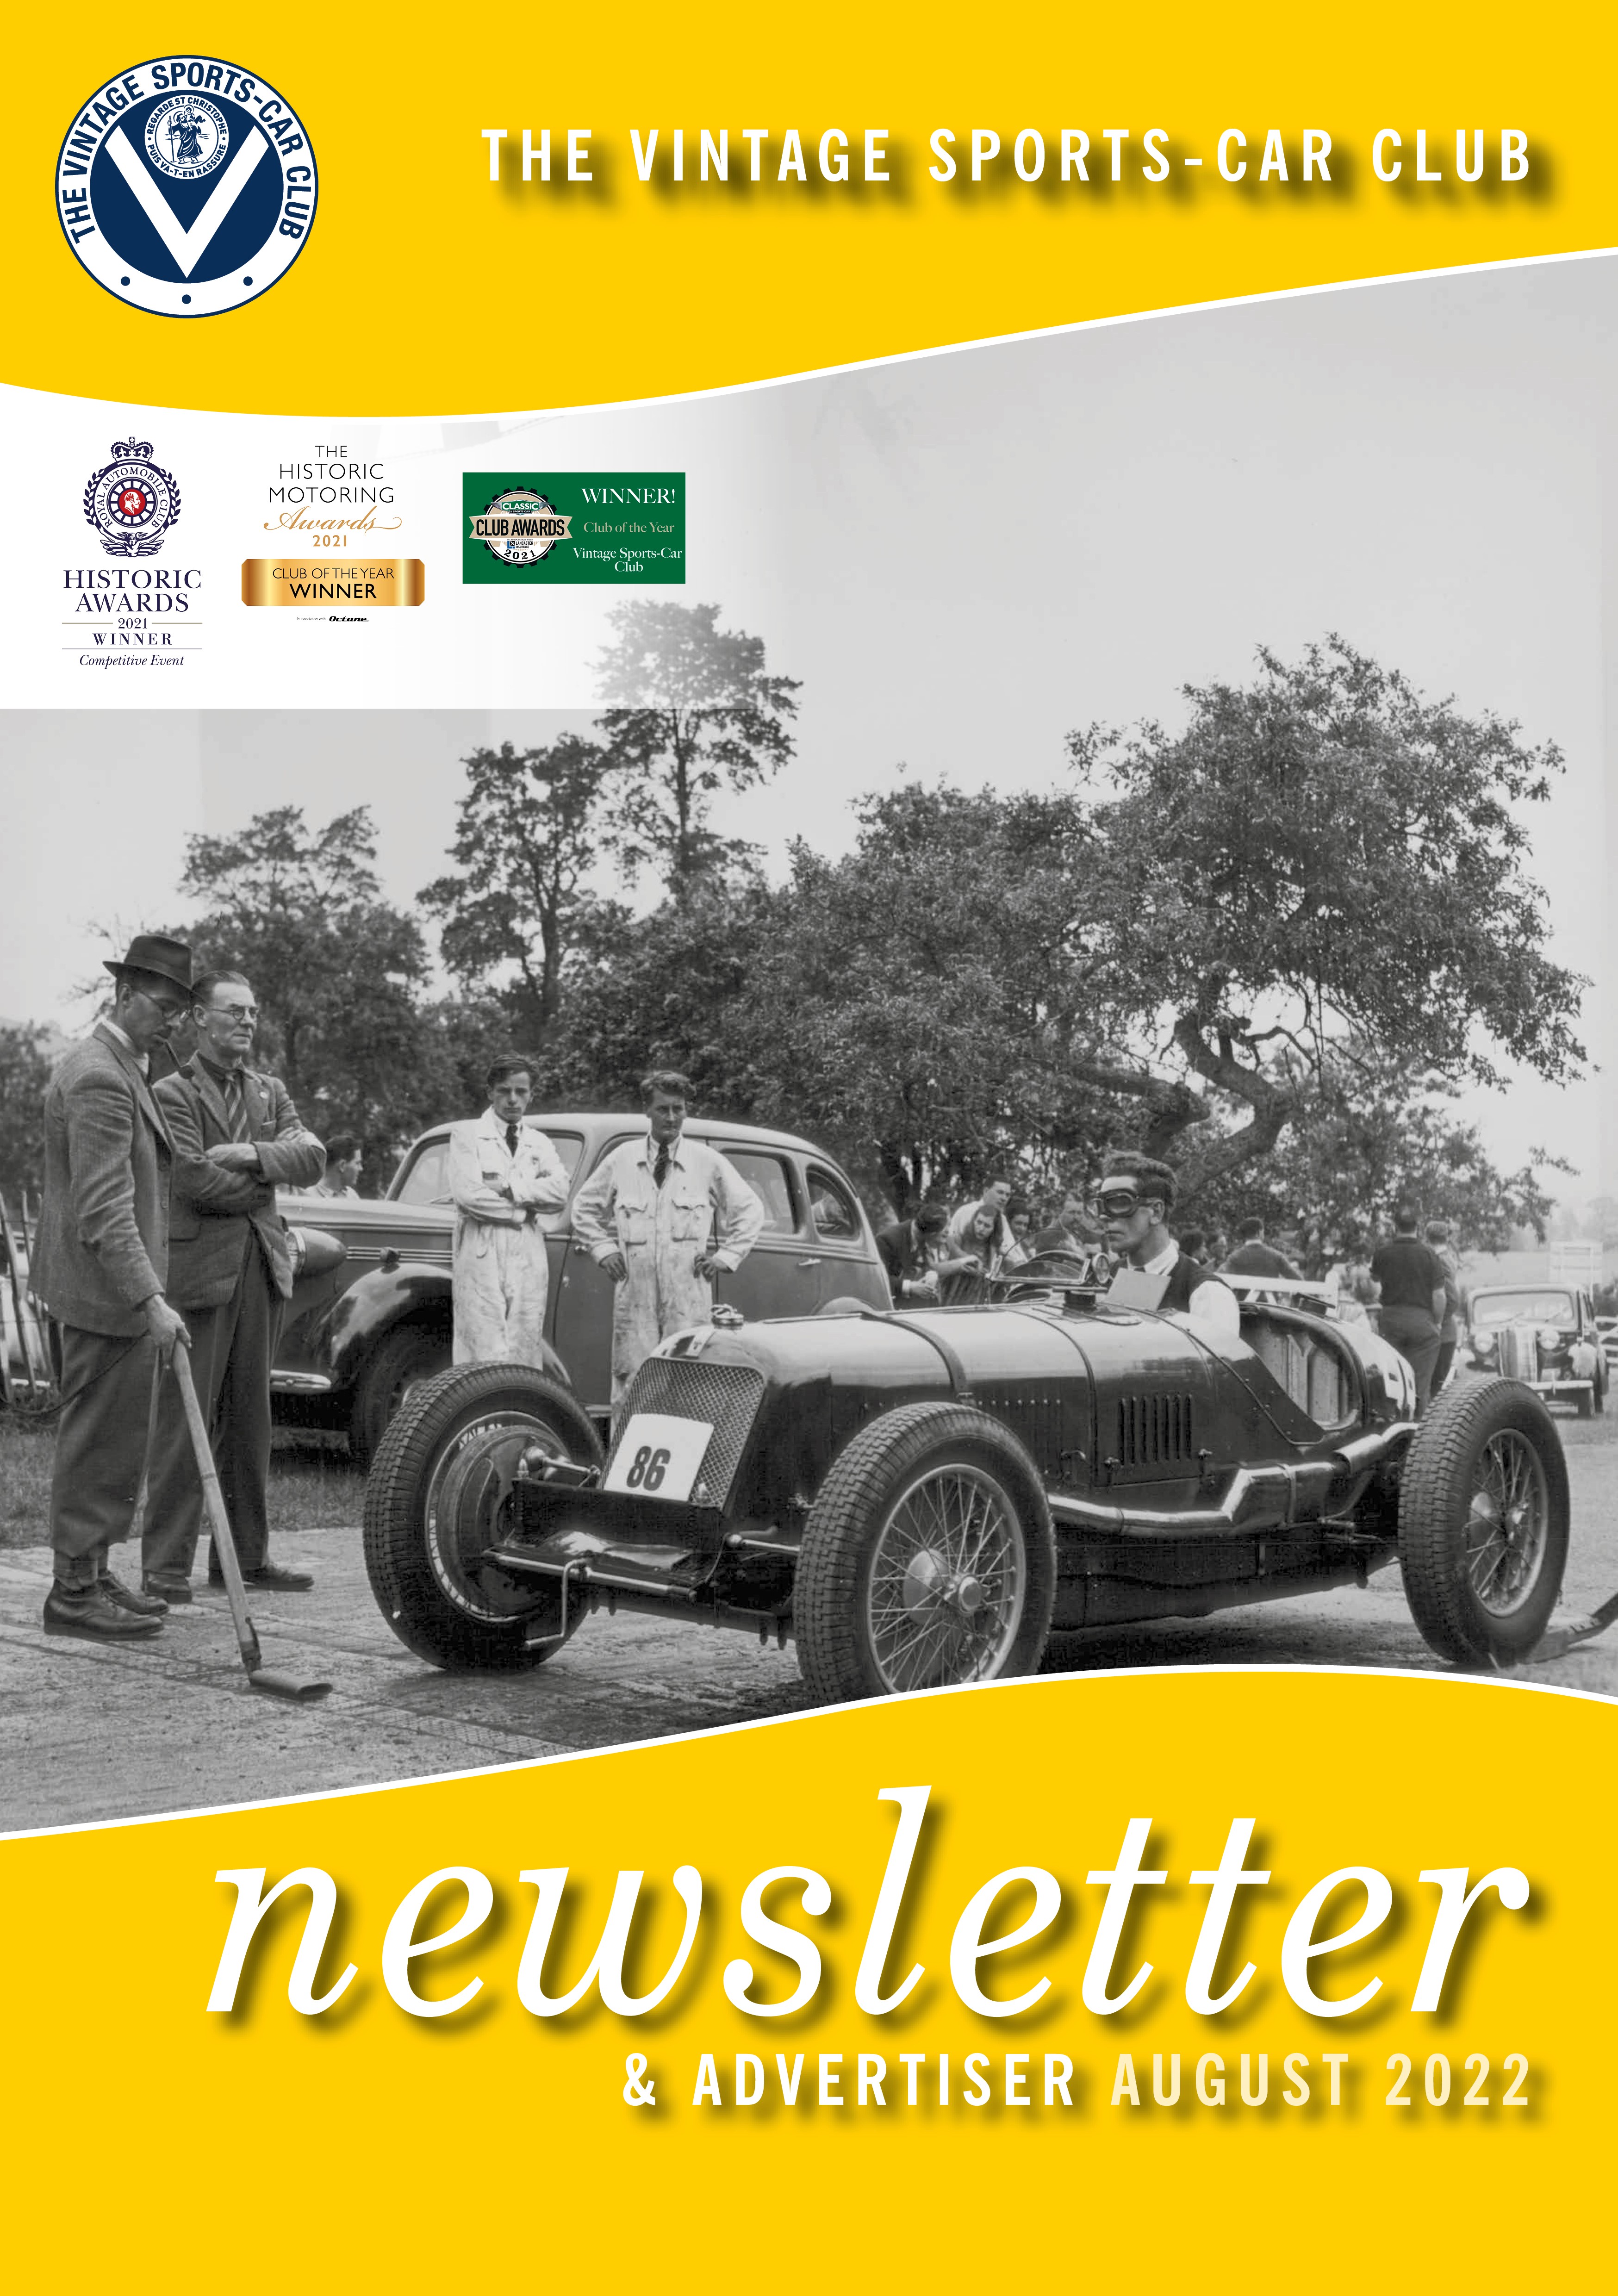 August 2022 Newsletter Now Available